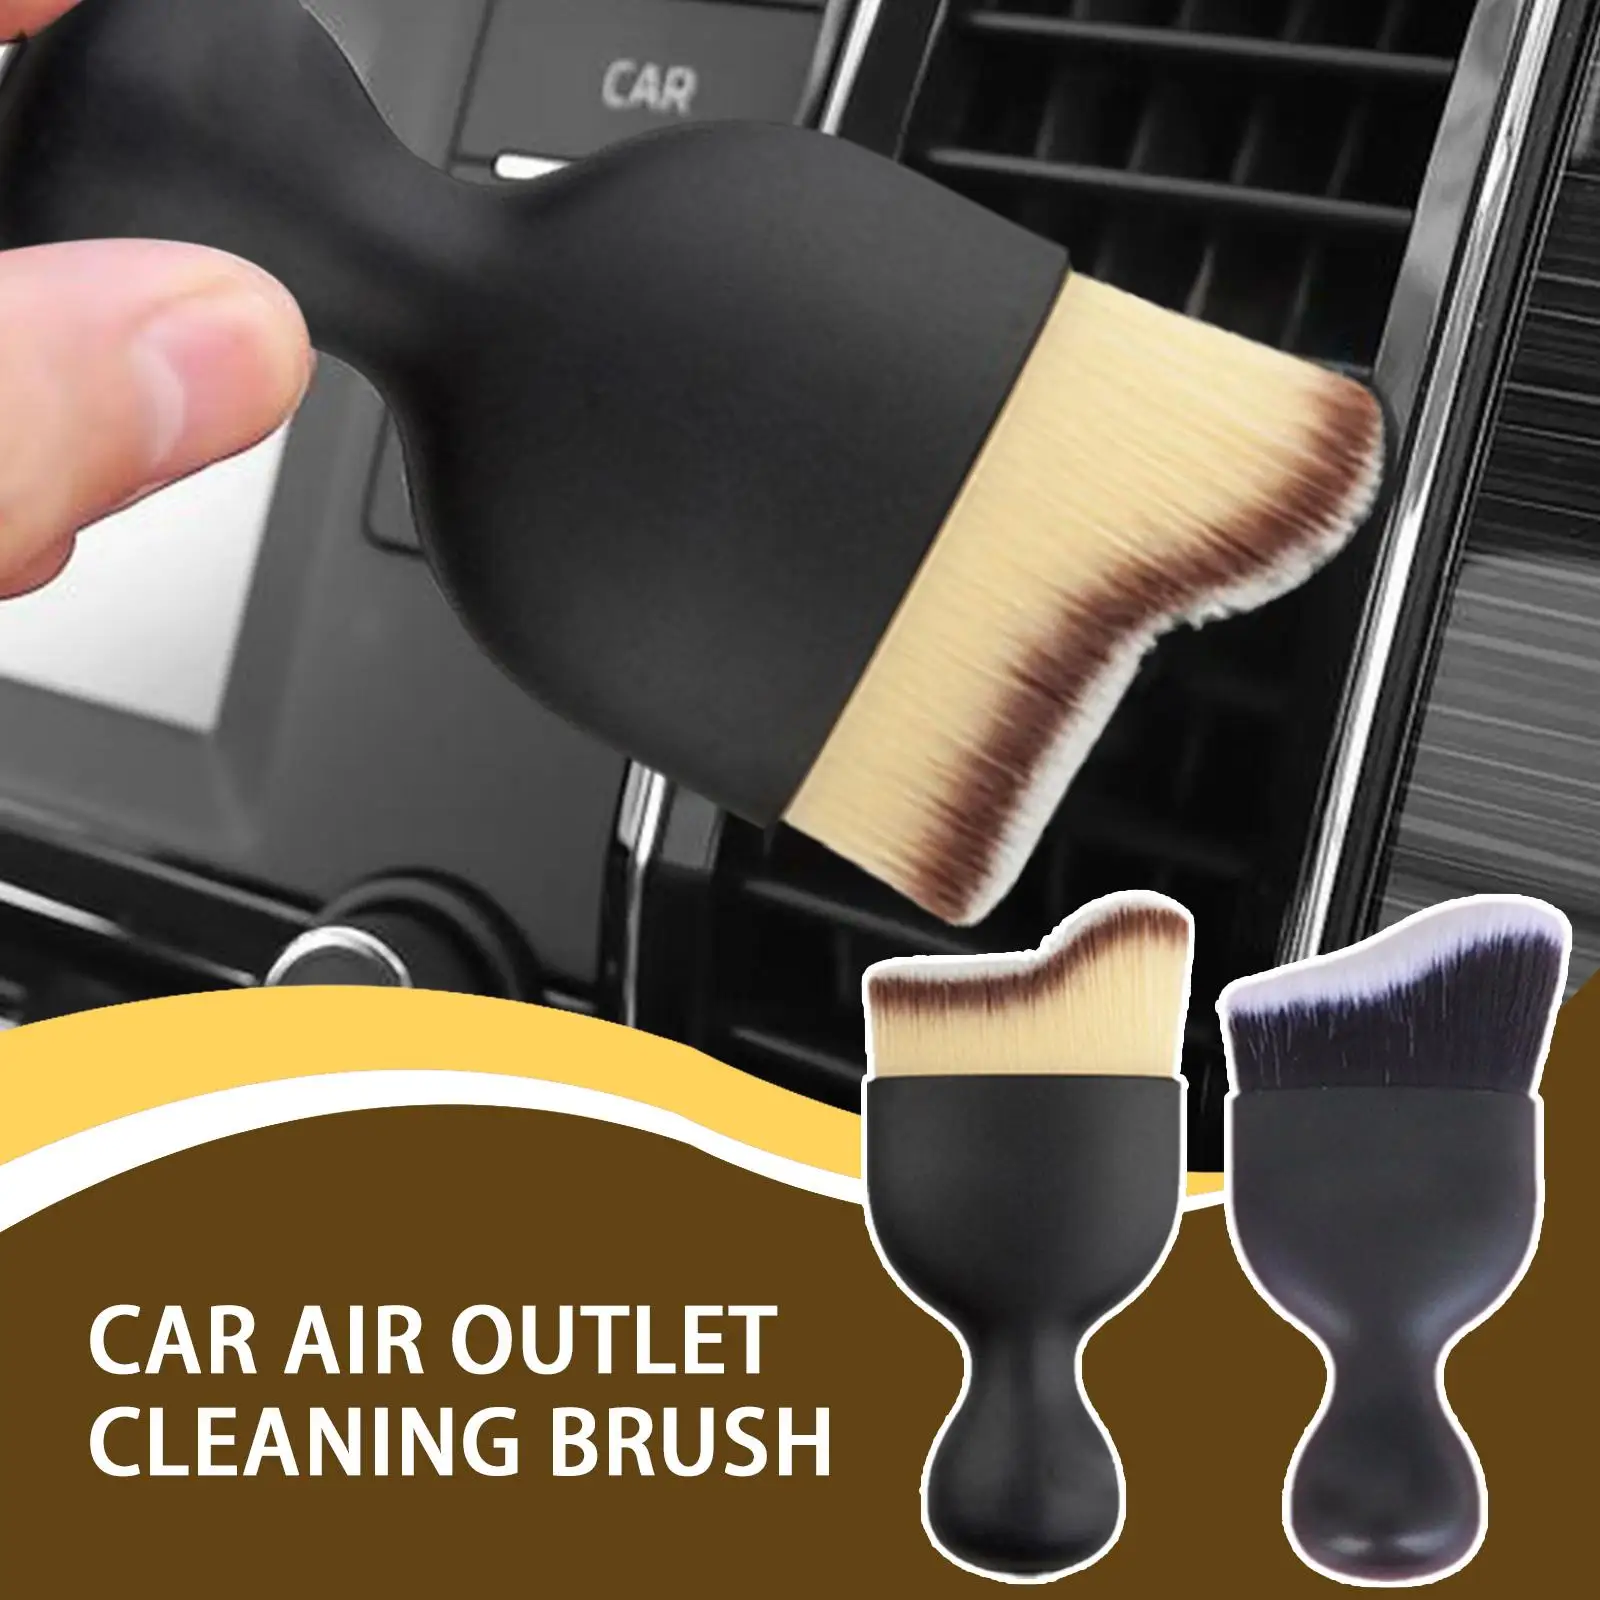 

Car Air Vent Cleaning Soft Brush with Casing Car Interior Tool Dusting Detailing Car Crevice Brush Car Cleaning Artificial J7G0